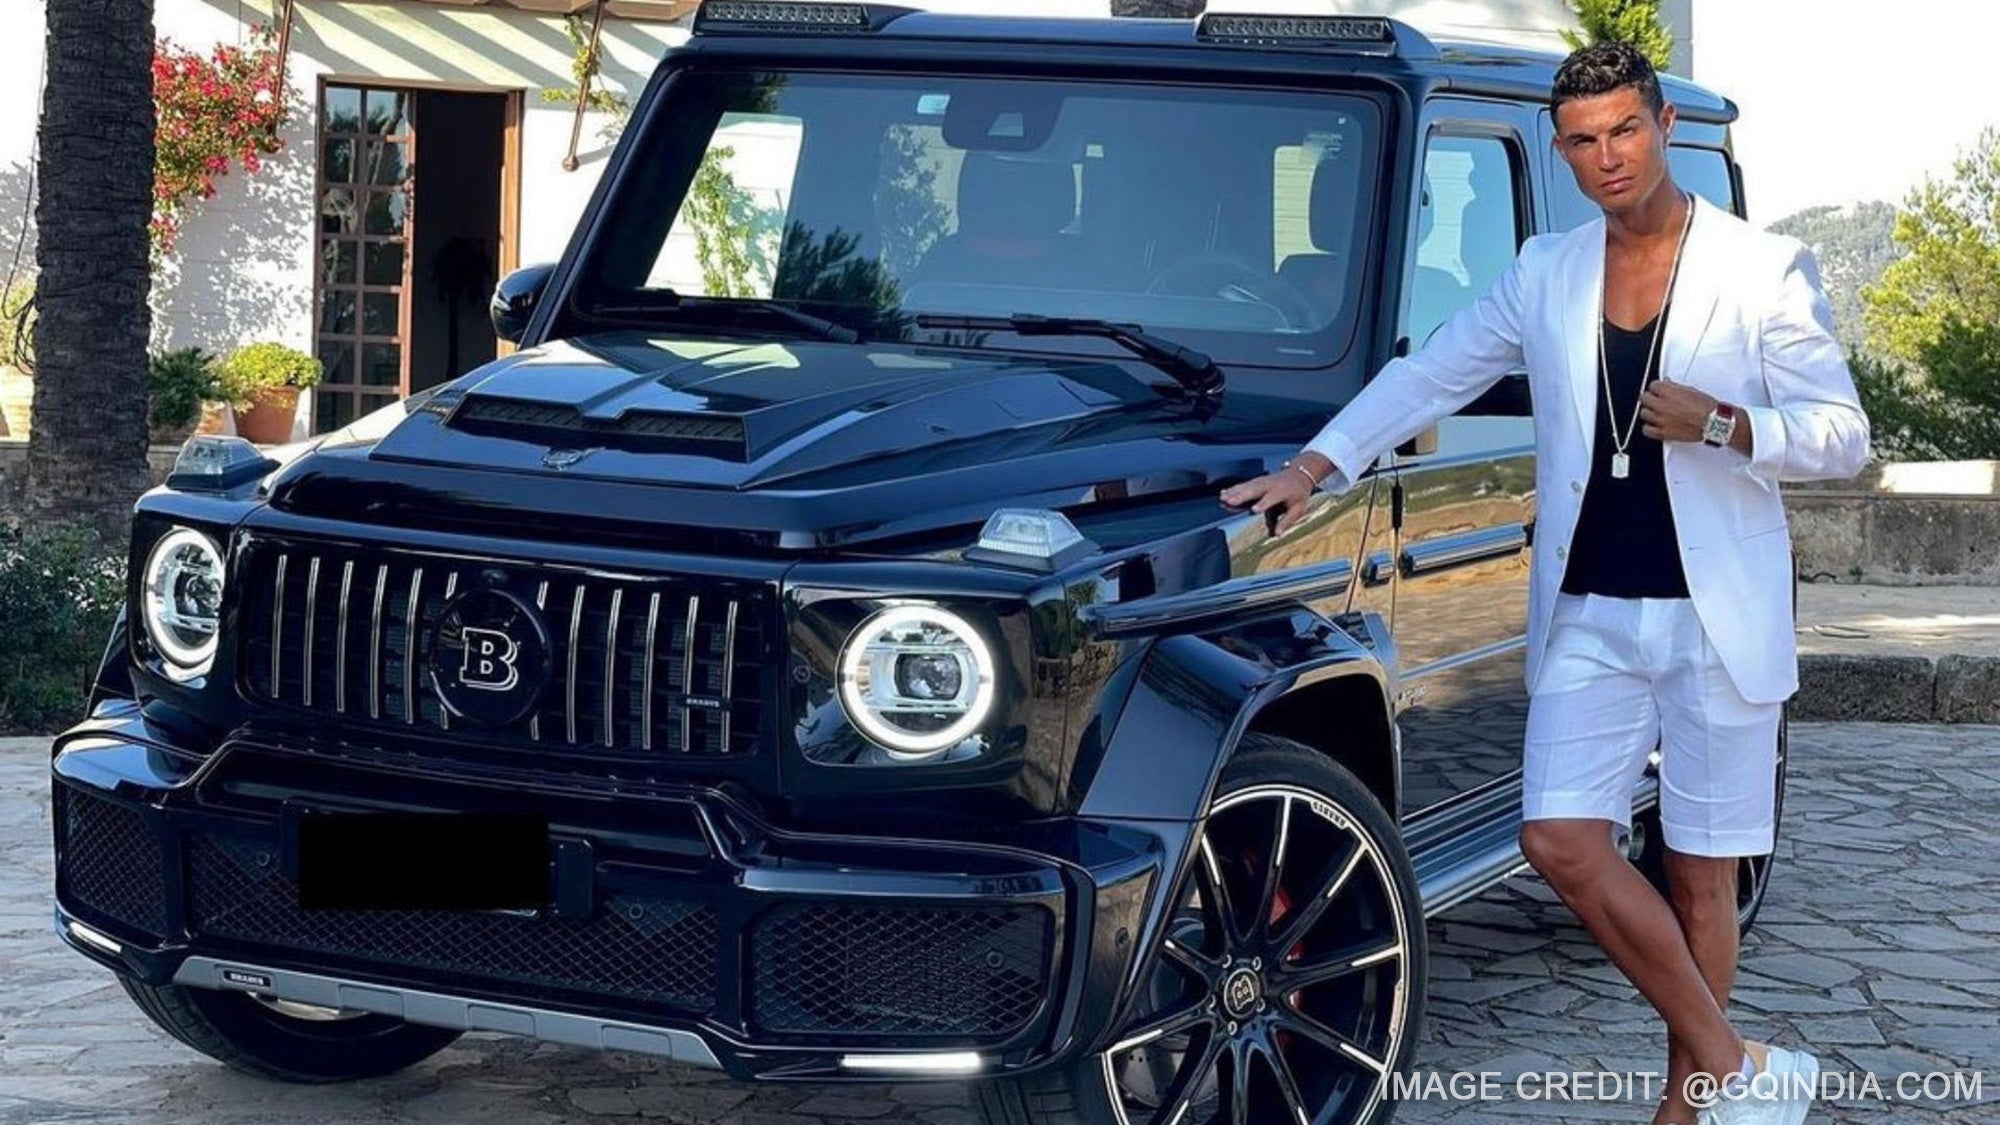 Cristiano Ronaldo have been spotted driving a beasty Brabus G Wagon